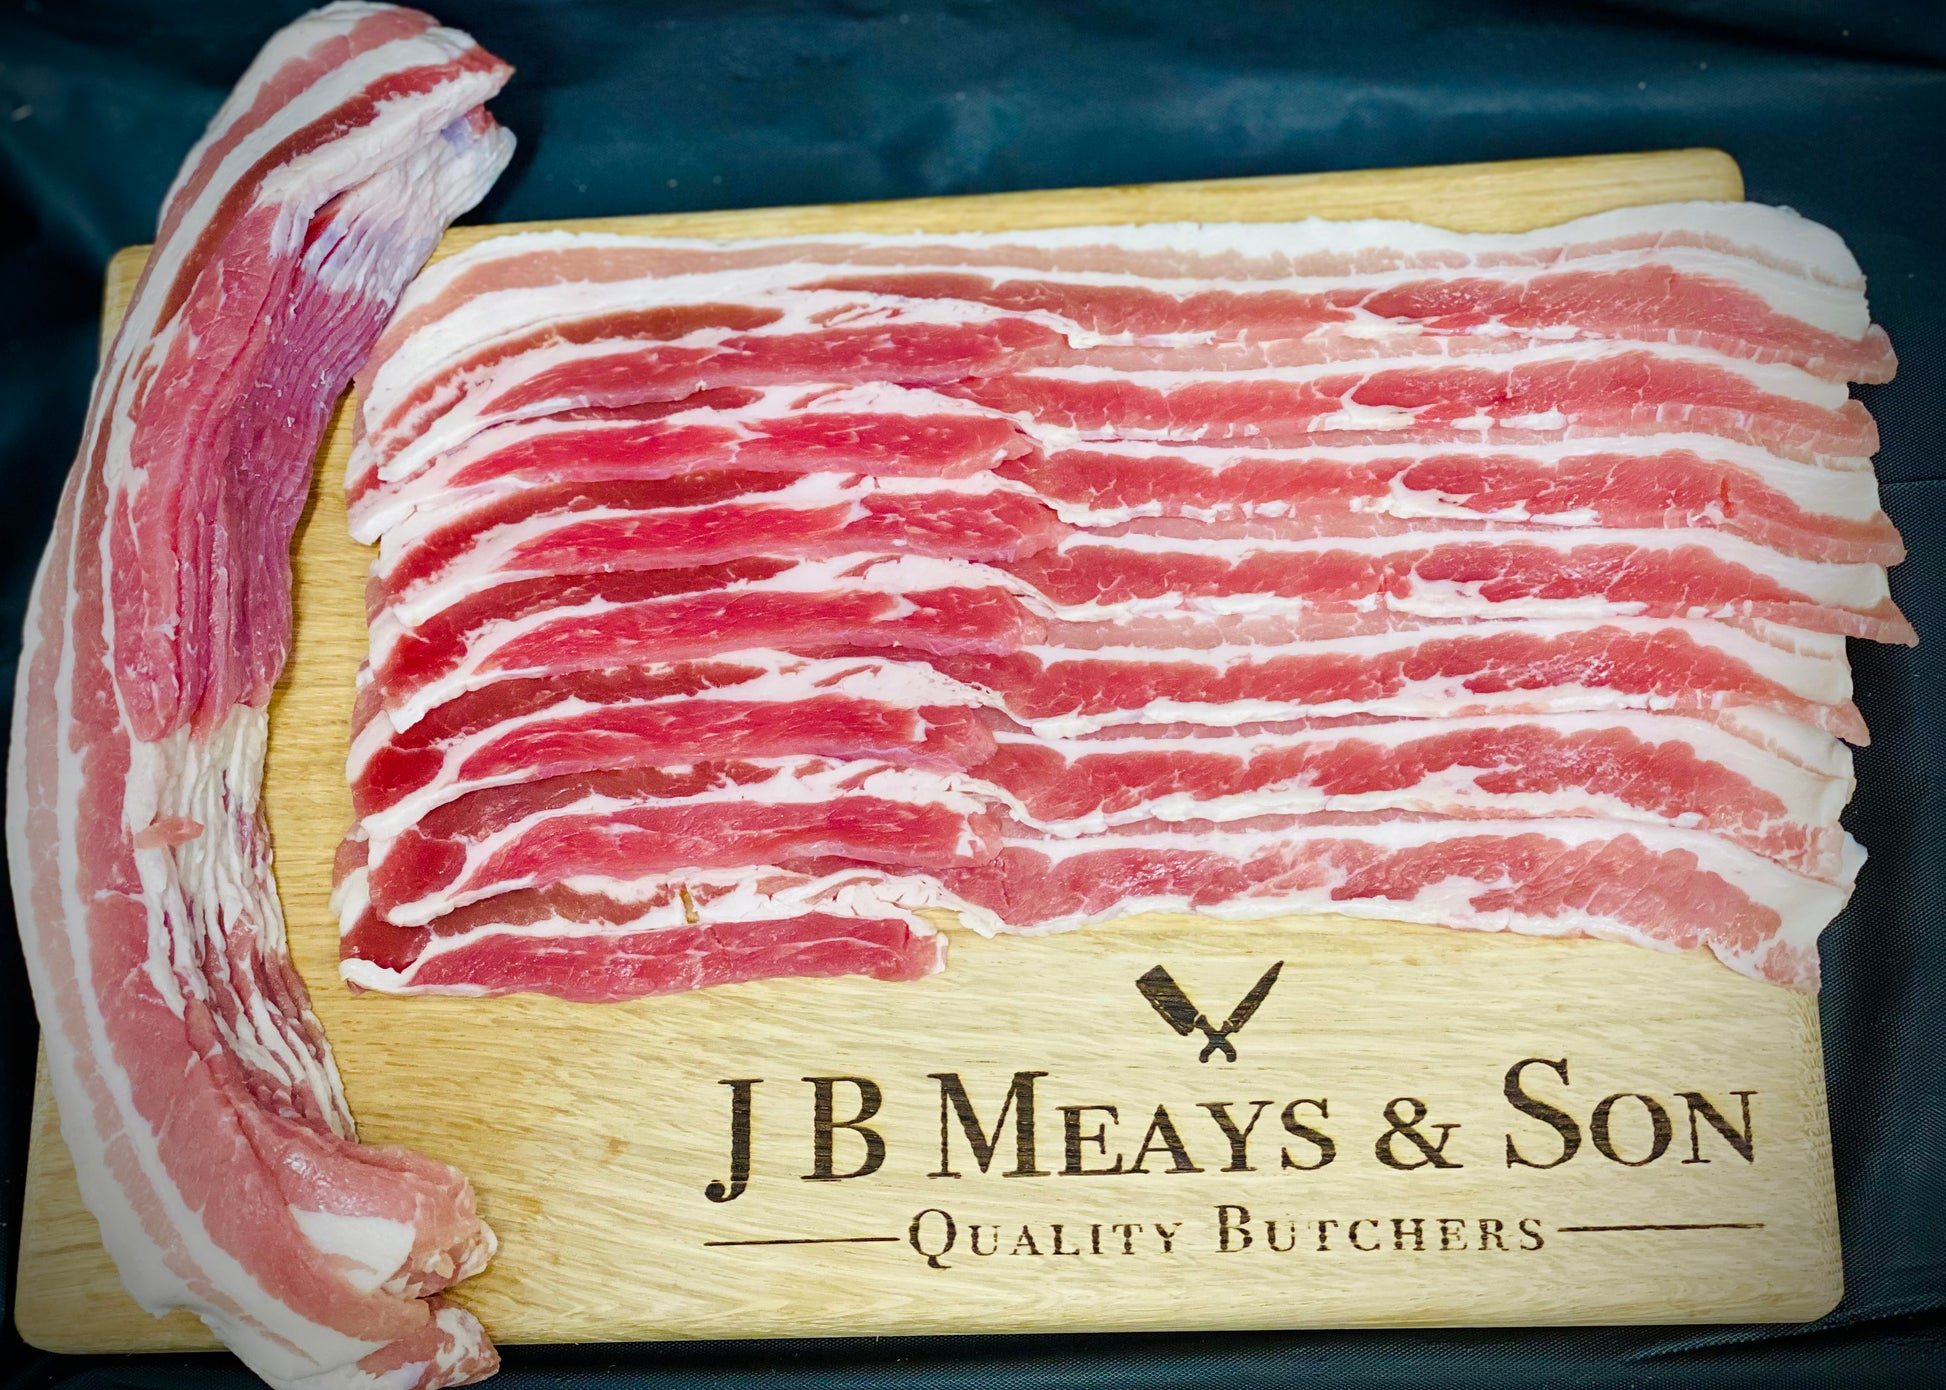 Top quality dry cured streaky bacon, locally sourced in Leeds. A definite winner, and an essential breakfast ingredient!